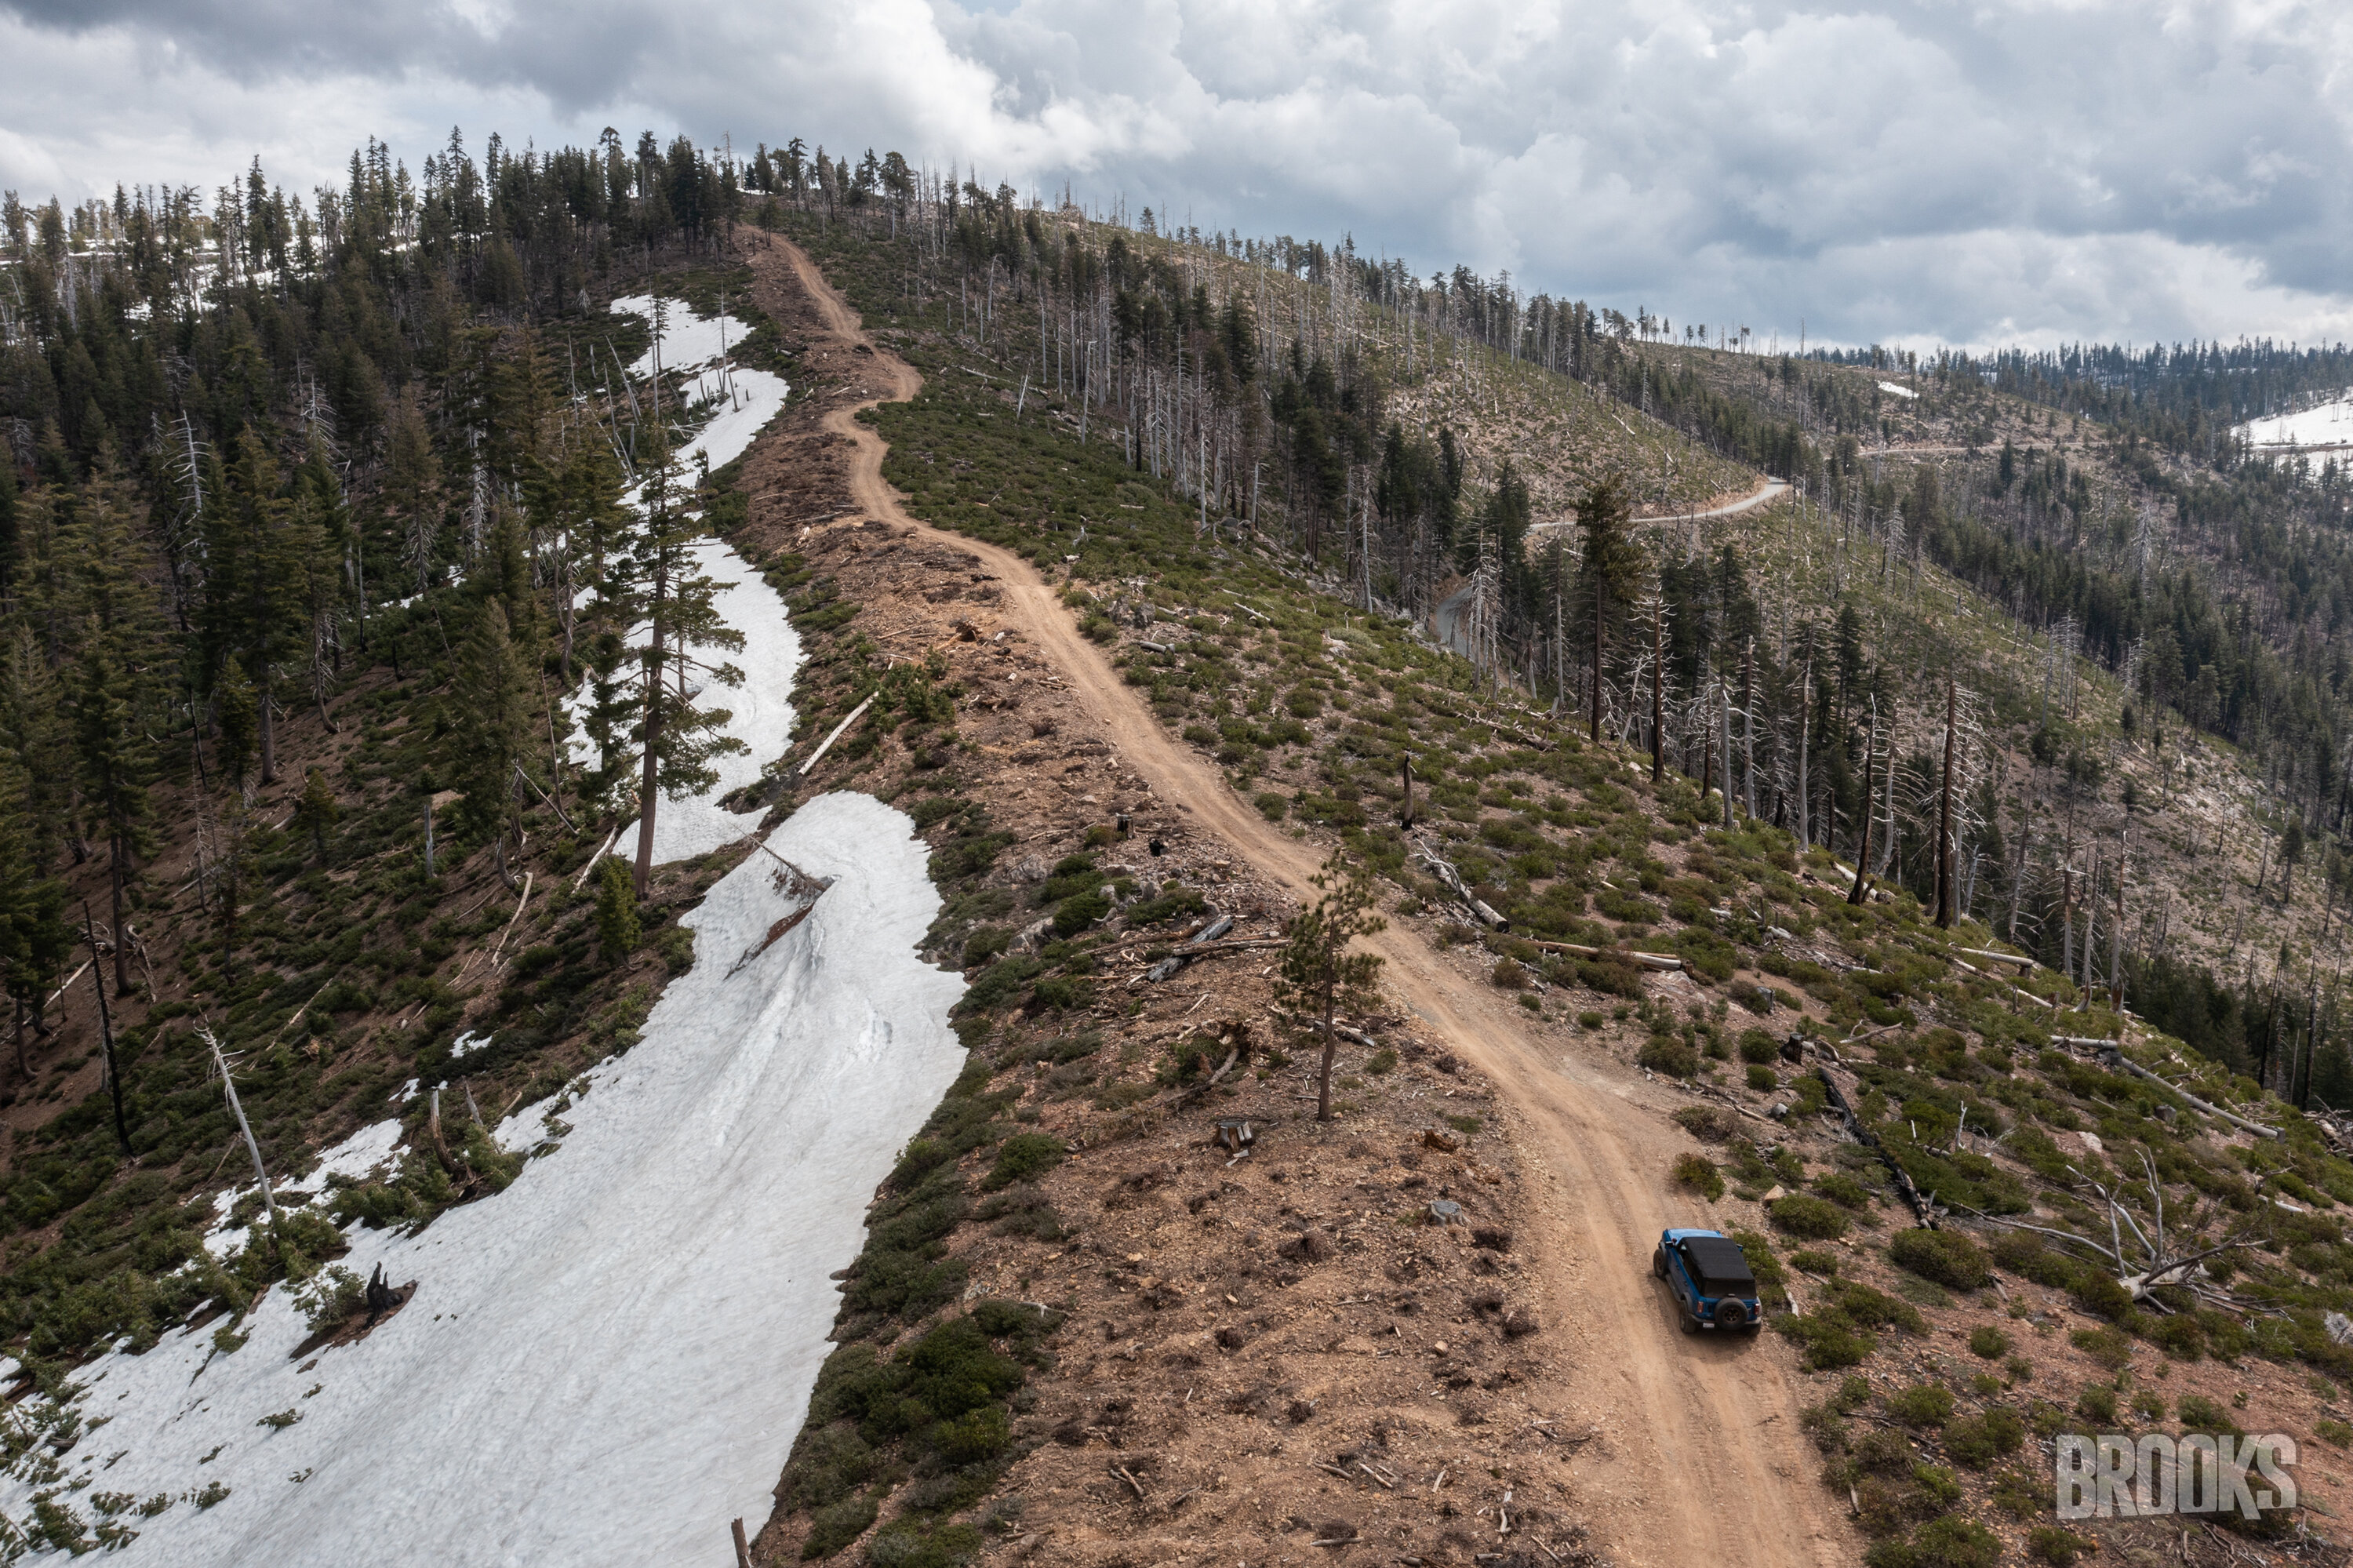 Ford Bronco Solo trip up to the hills this weekend DJI_0596